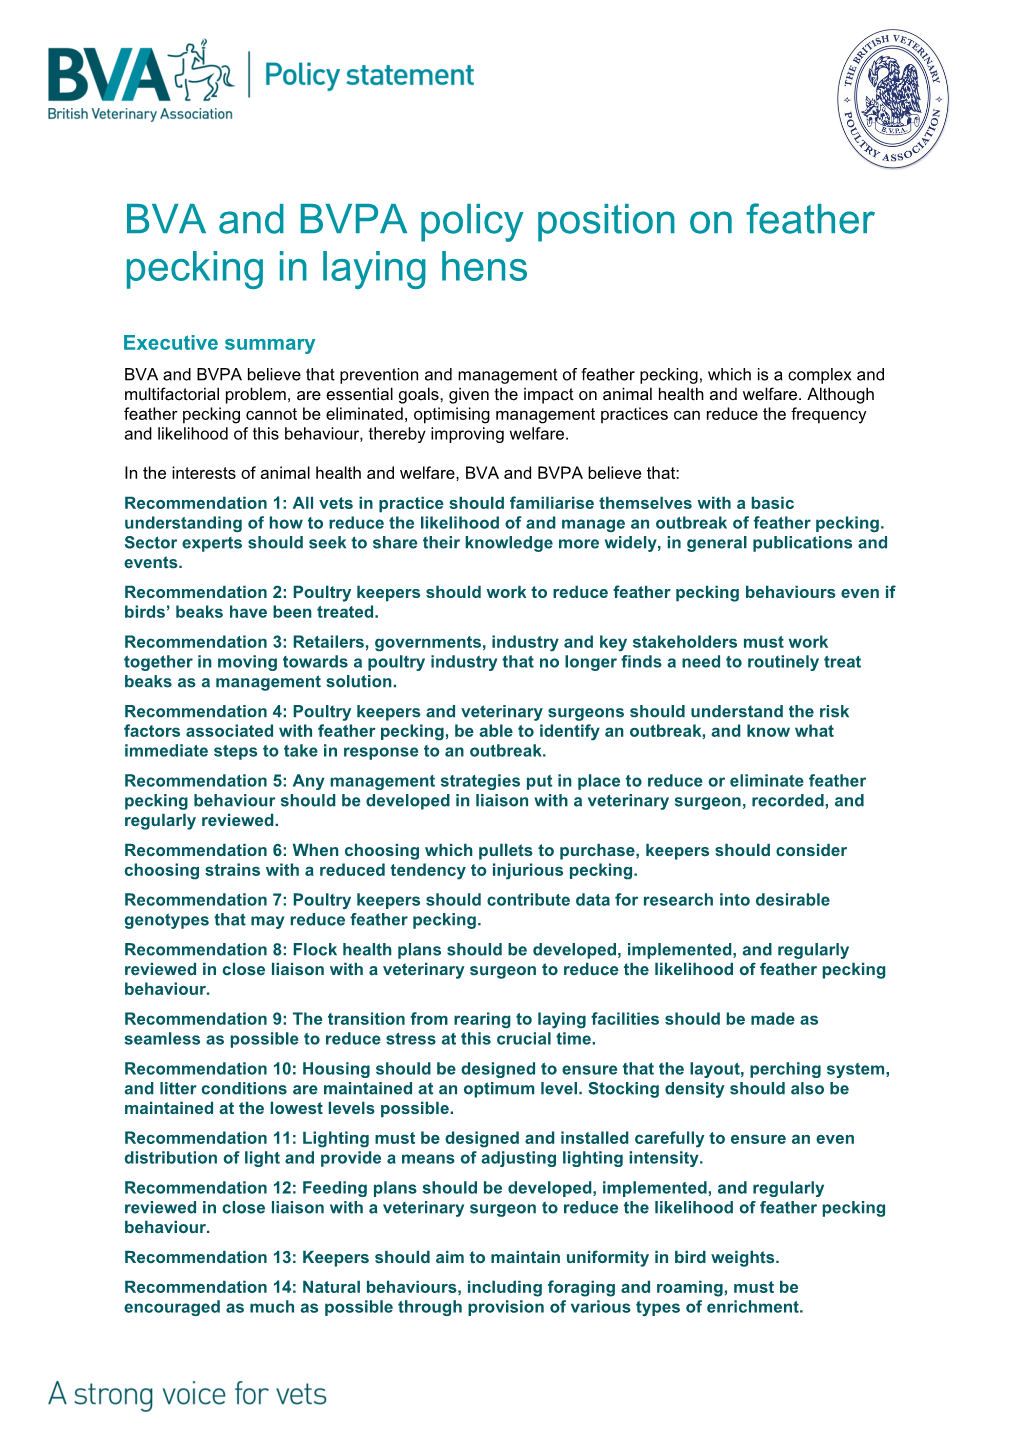 BVA and BVPA Policy Position on Feather Pecking in Laying Hens